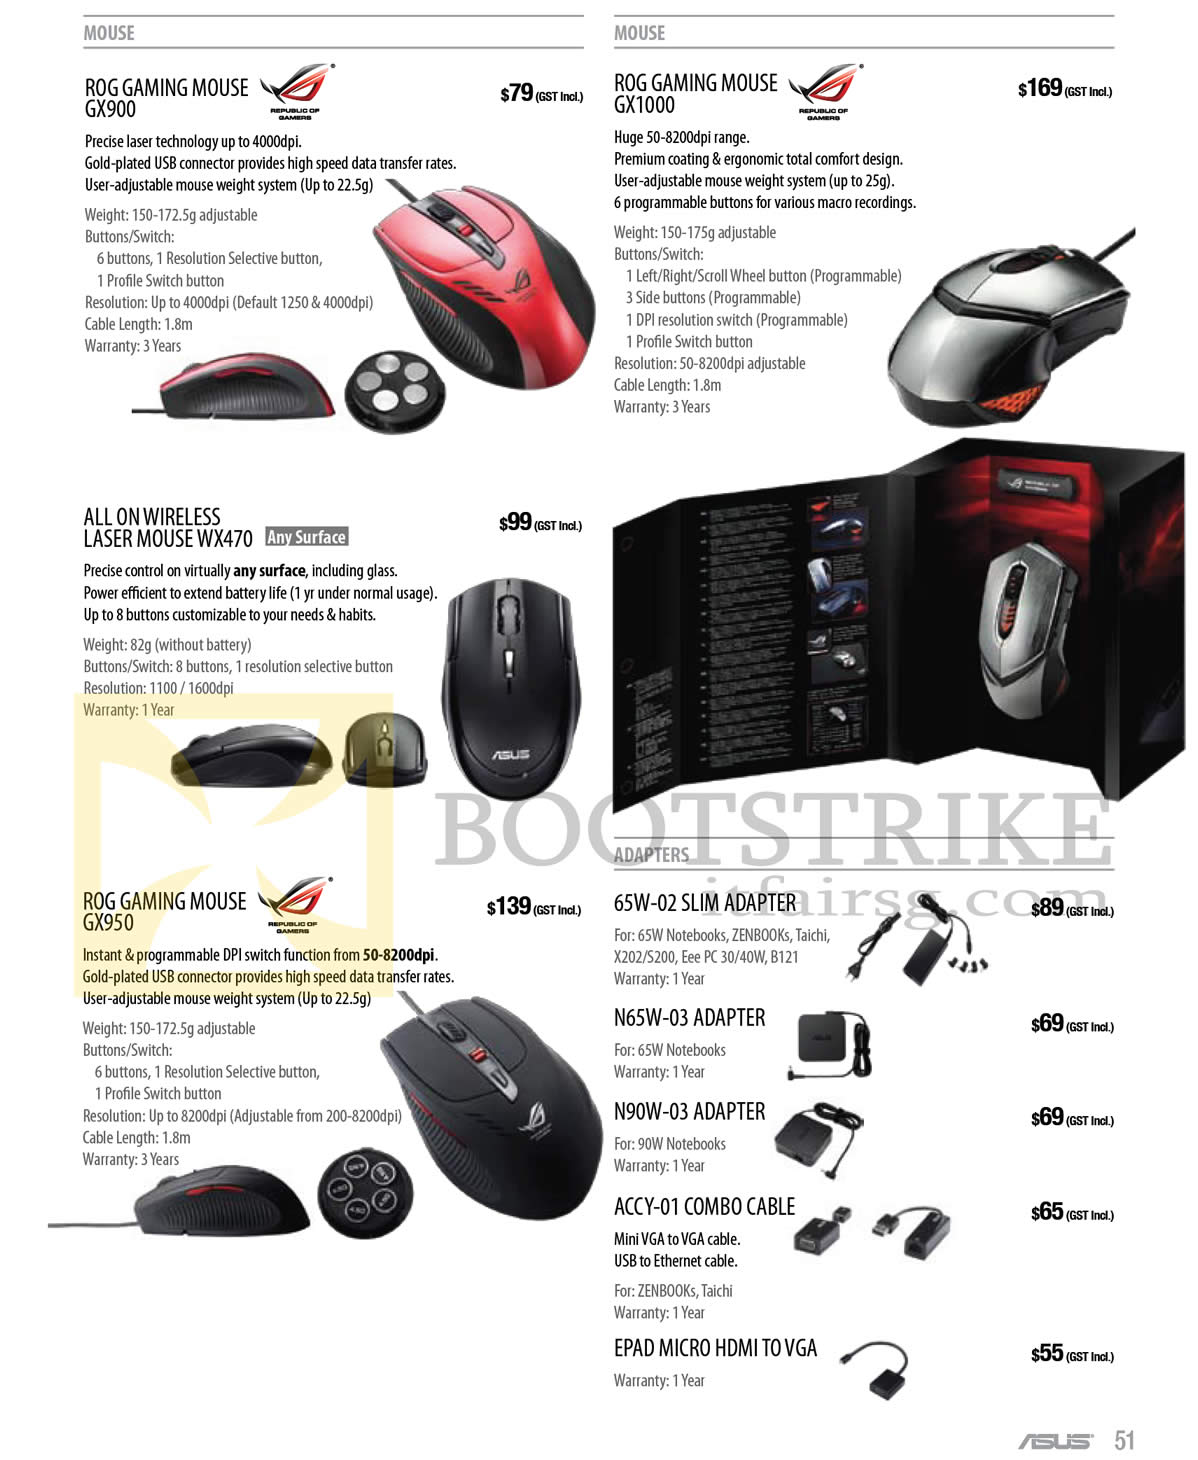 PC SHOW 2013 price list image brochure of ASUS Notebooks Accessories ROG Gaming Mouse GX900, Laser WX470, GX950, GX1000, Power Adapters, Cables